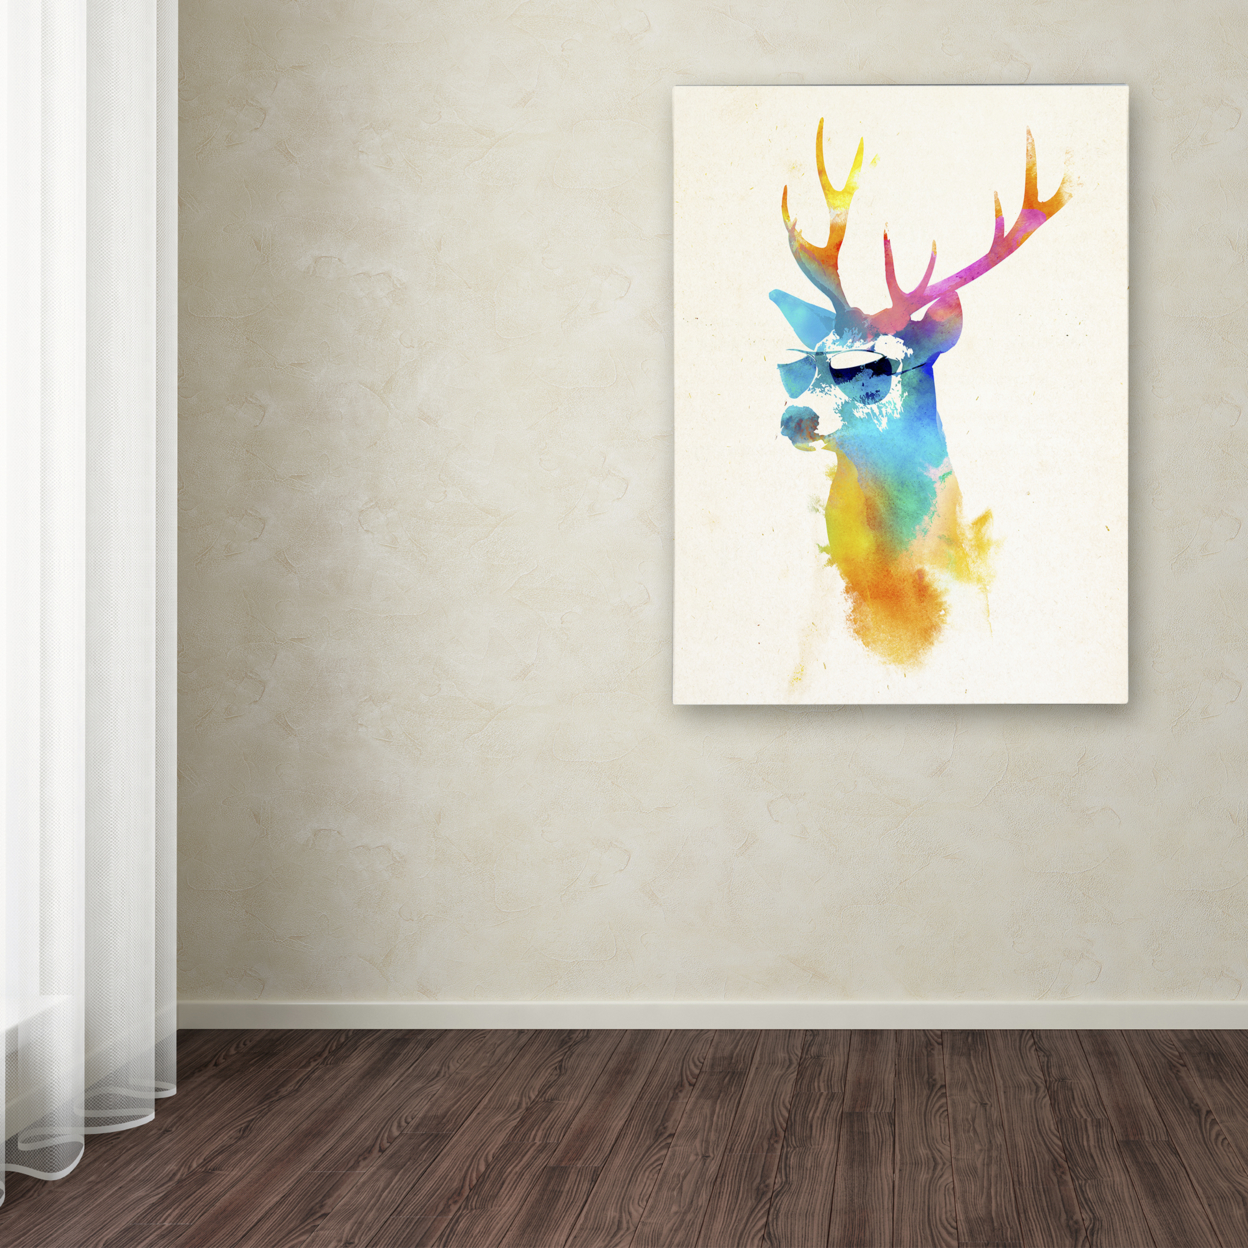 Robert Farkas 'Sunny Stag' Canvas Wall Art 35 X 47 Inches